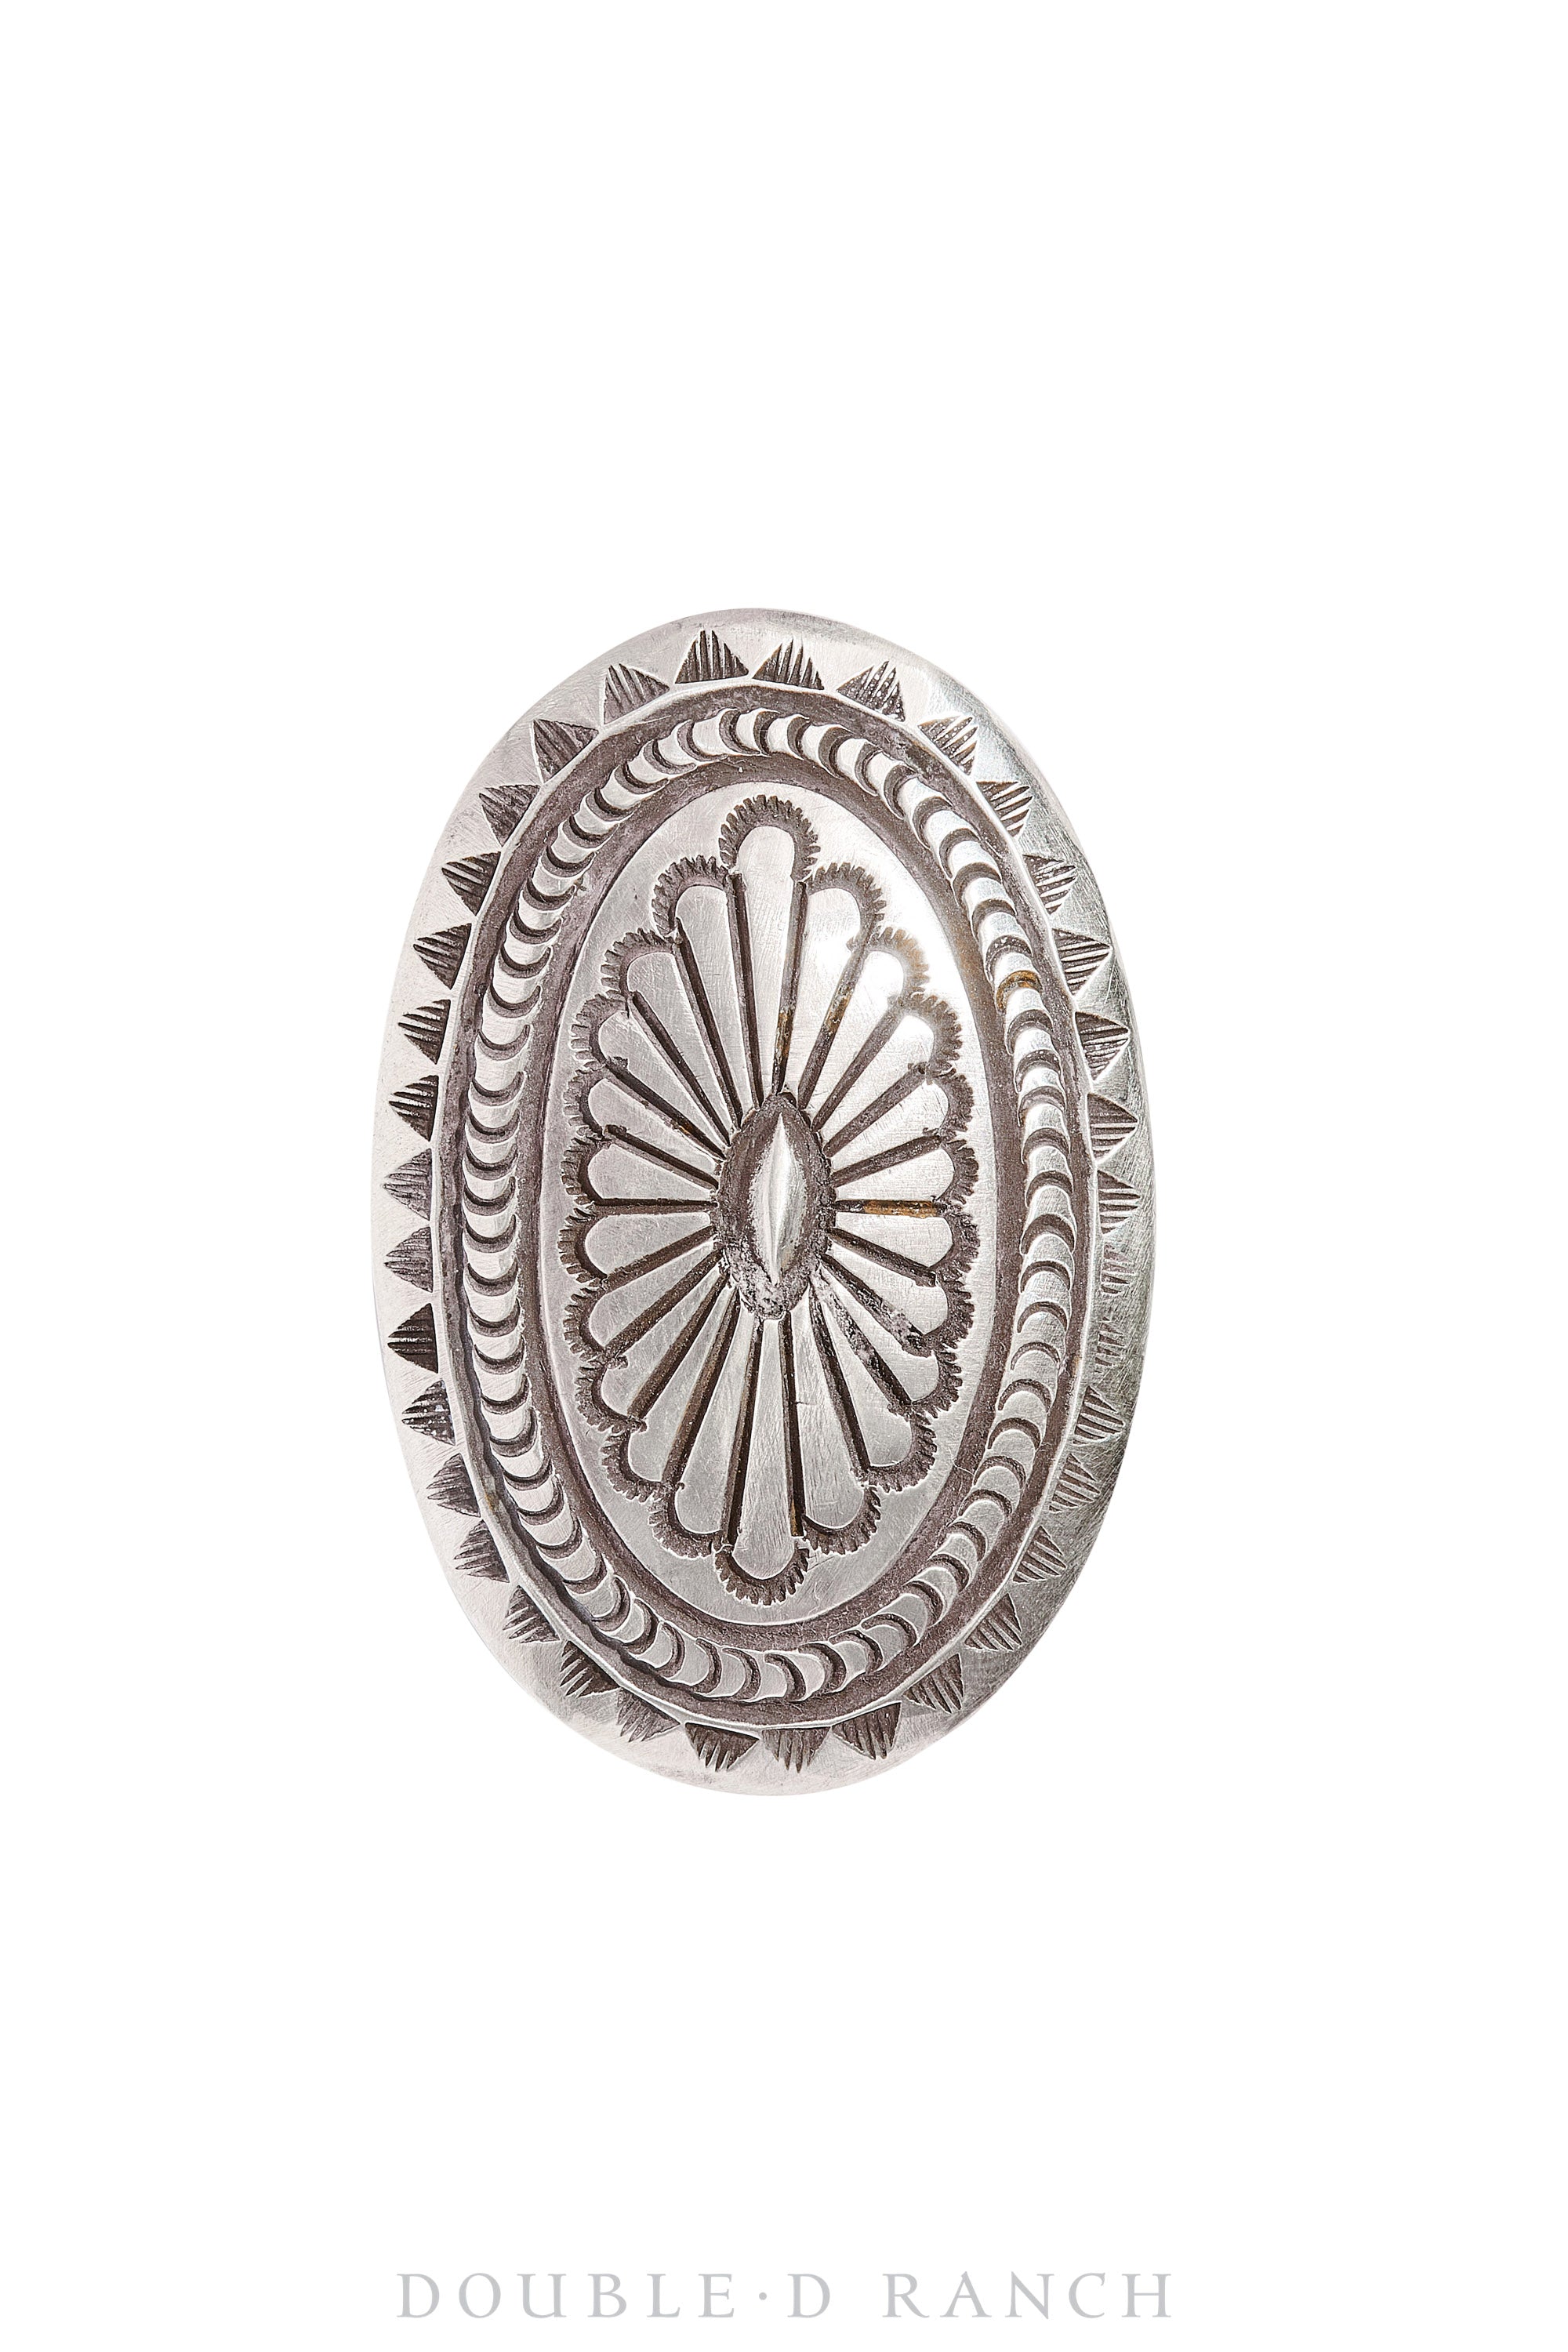 Ring, Concho, Sterling Silver, Stampwork, Artisan, Contemporary, 1073